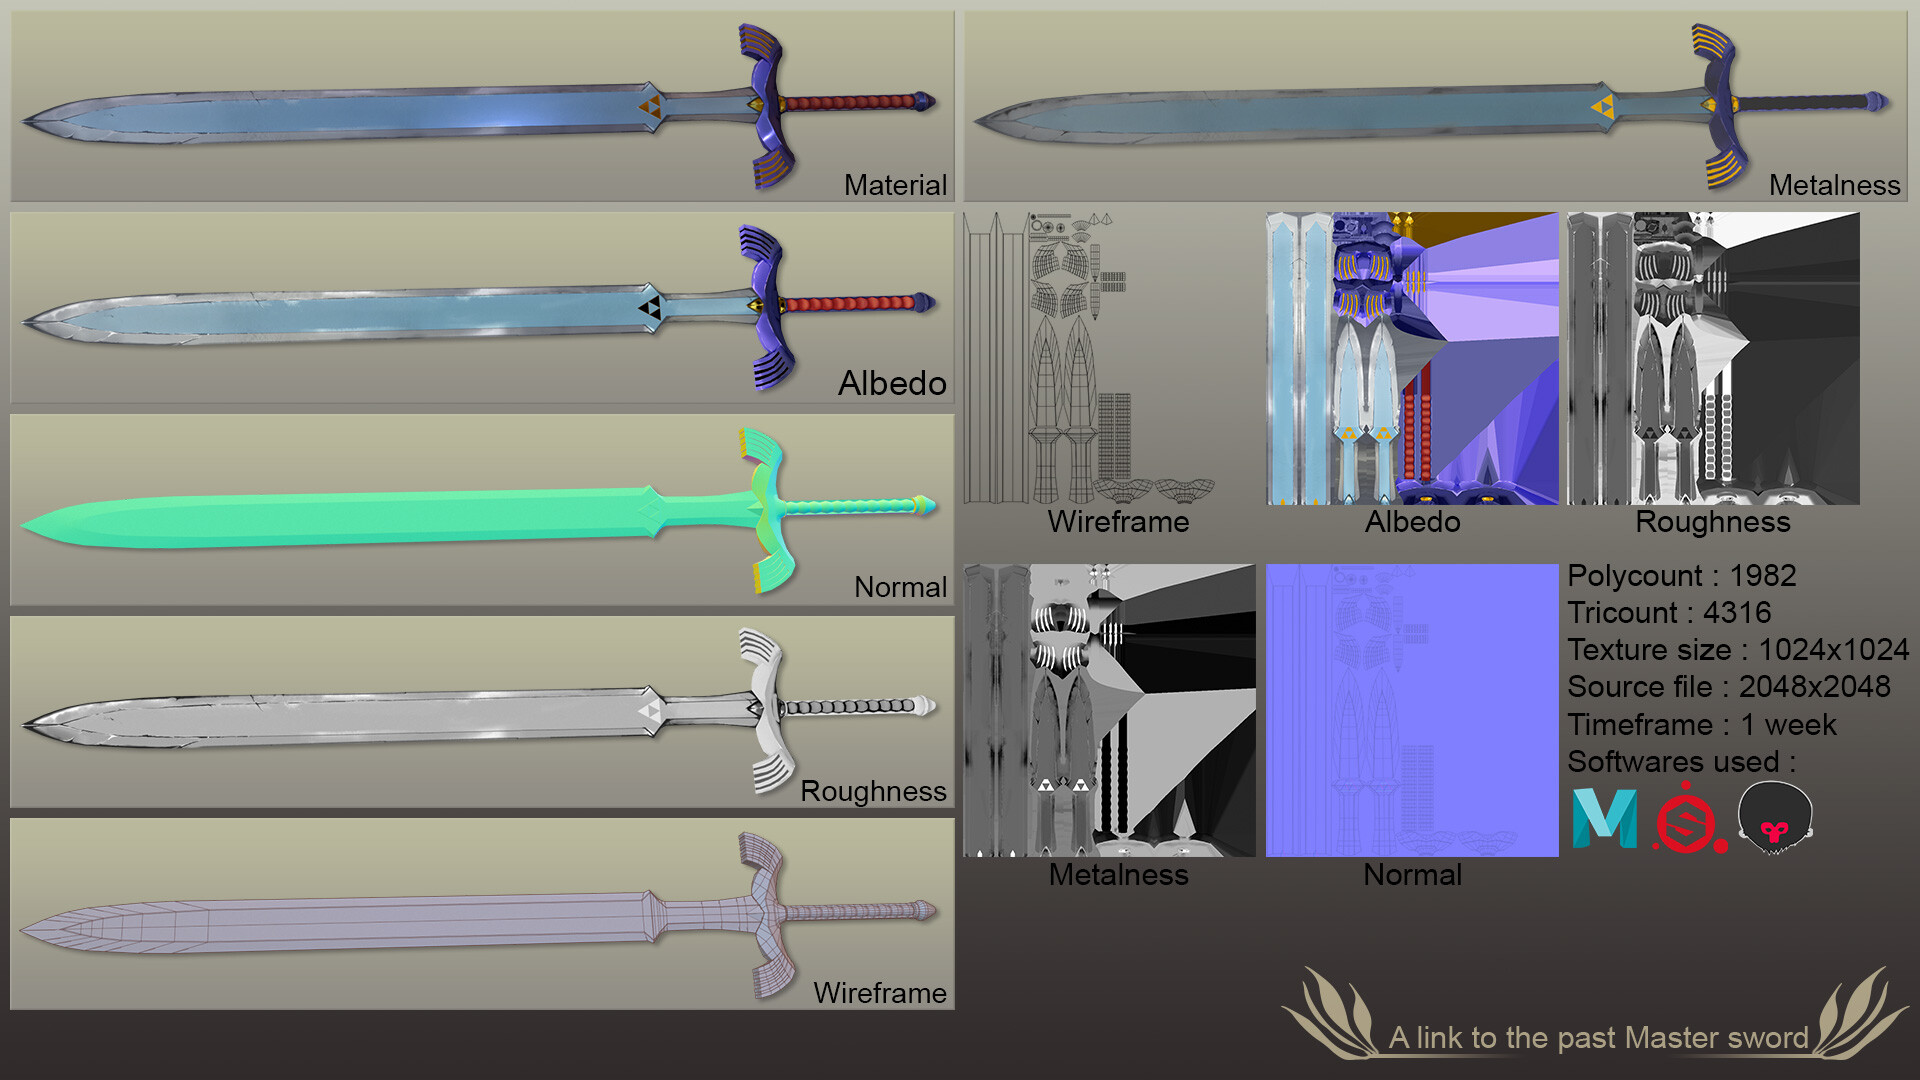 Link to the Past Master Sword by likelikes on DeviantArt